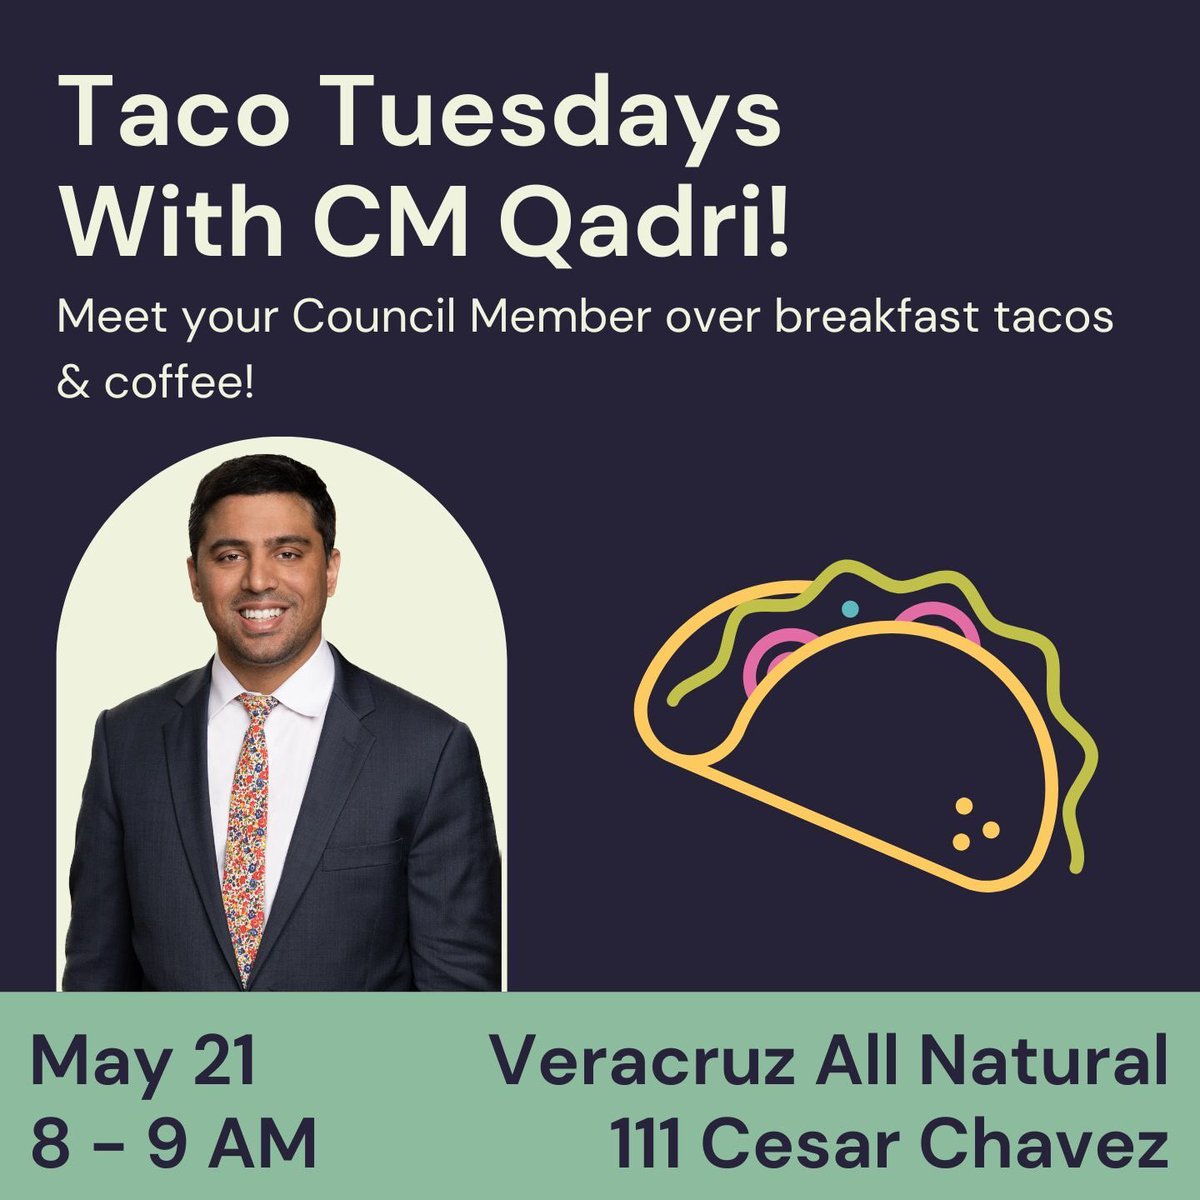 District 9 residents—let's eat breakfast tacos and chat about what's important to you! I'll be hosting Taco Tuesday on May 21st at 8:00am at Veracruz All Natural (at The LINE Hotel). Hope to see you there!